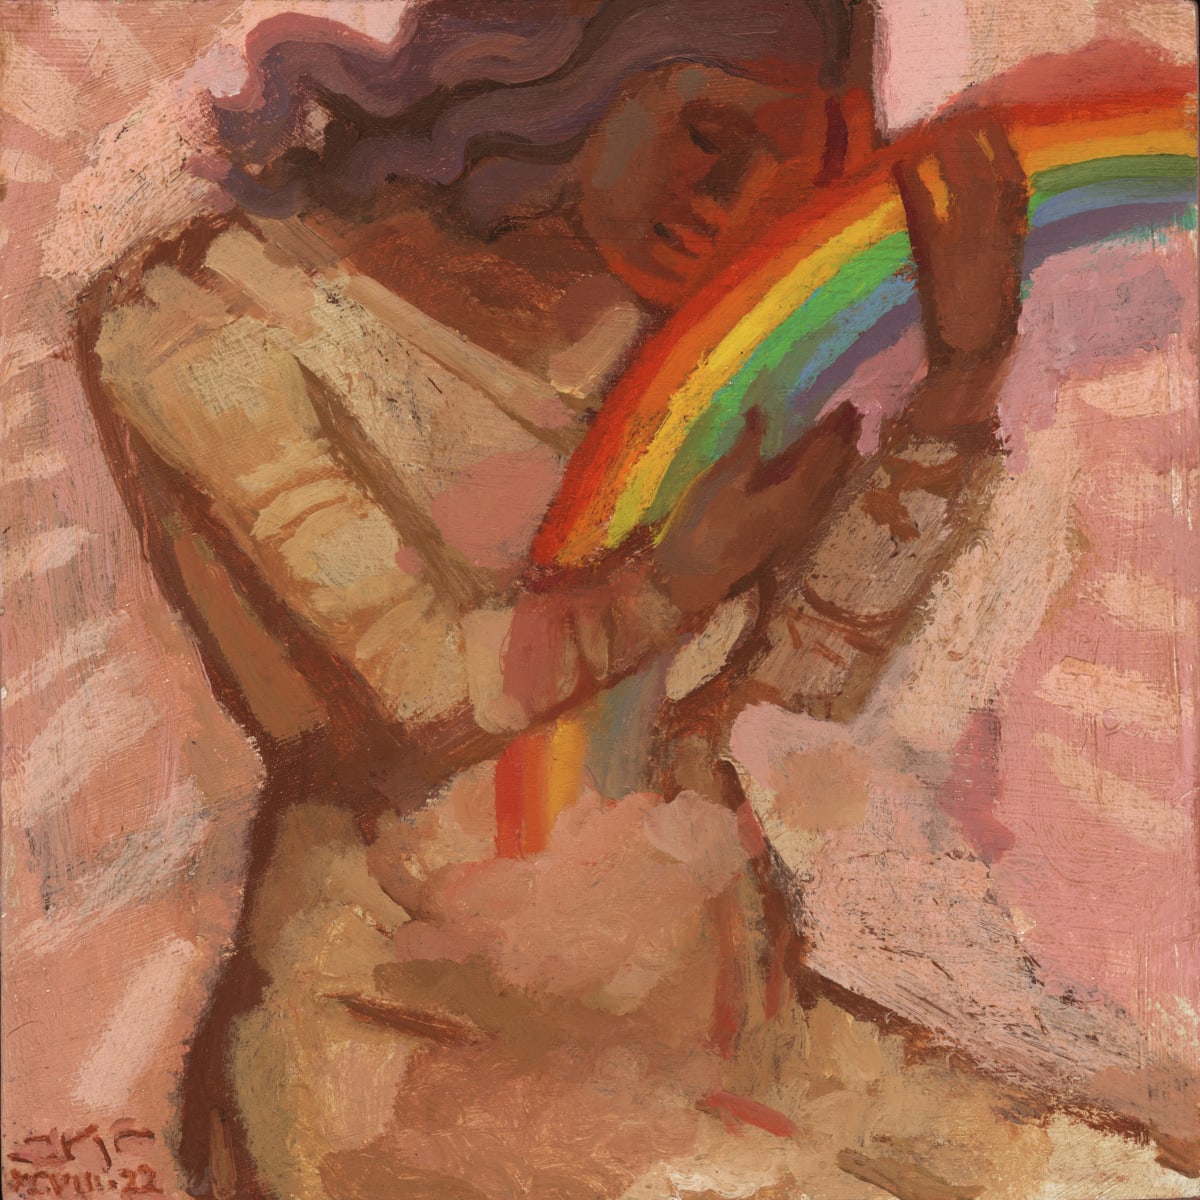 The  Mother Embraces the Rainbow by J. Kirk Richards  Image: A woman cradles the beams of a rainbow in her hands. 